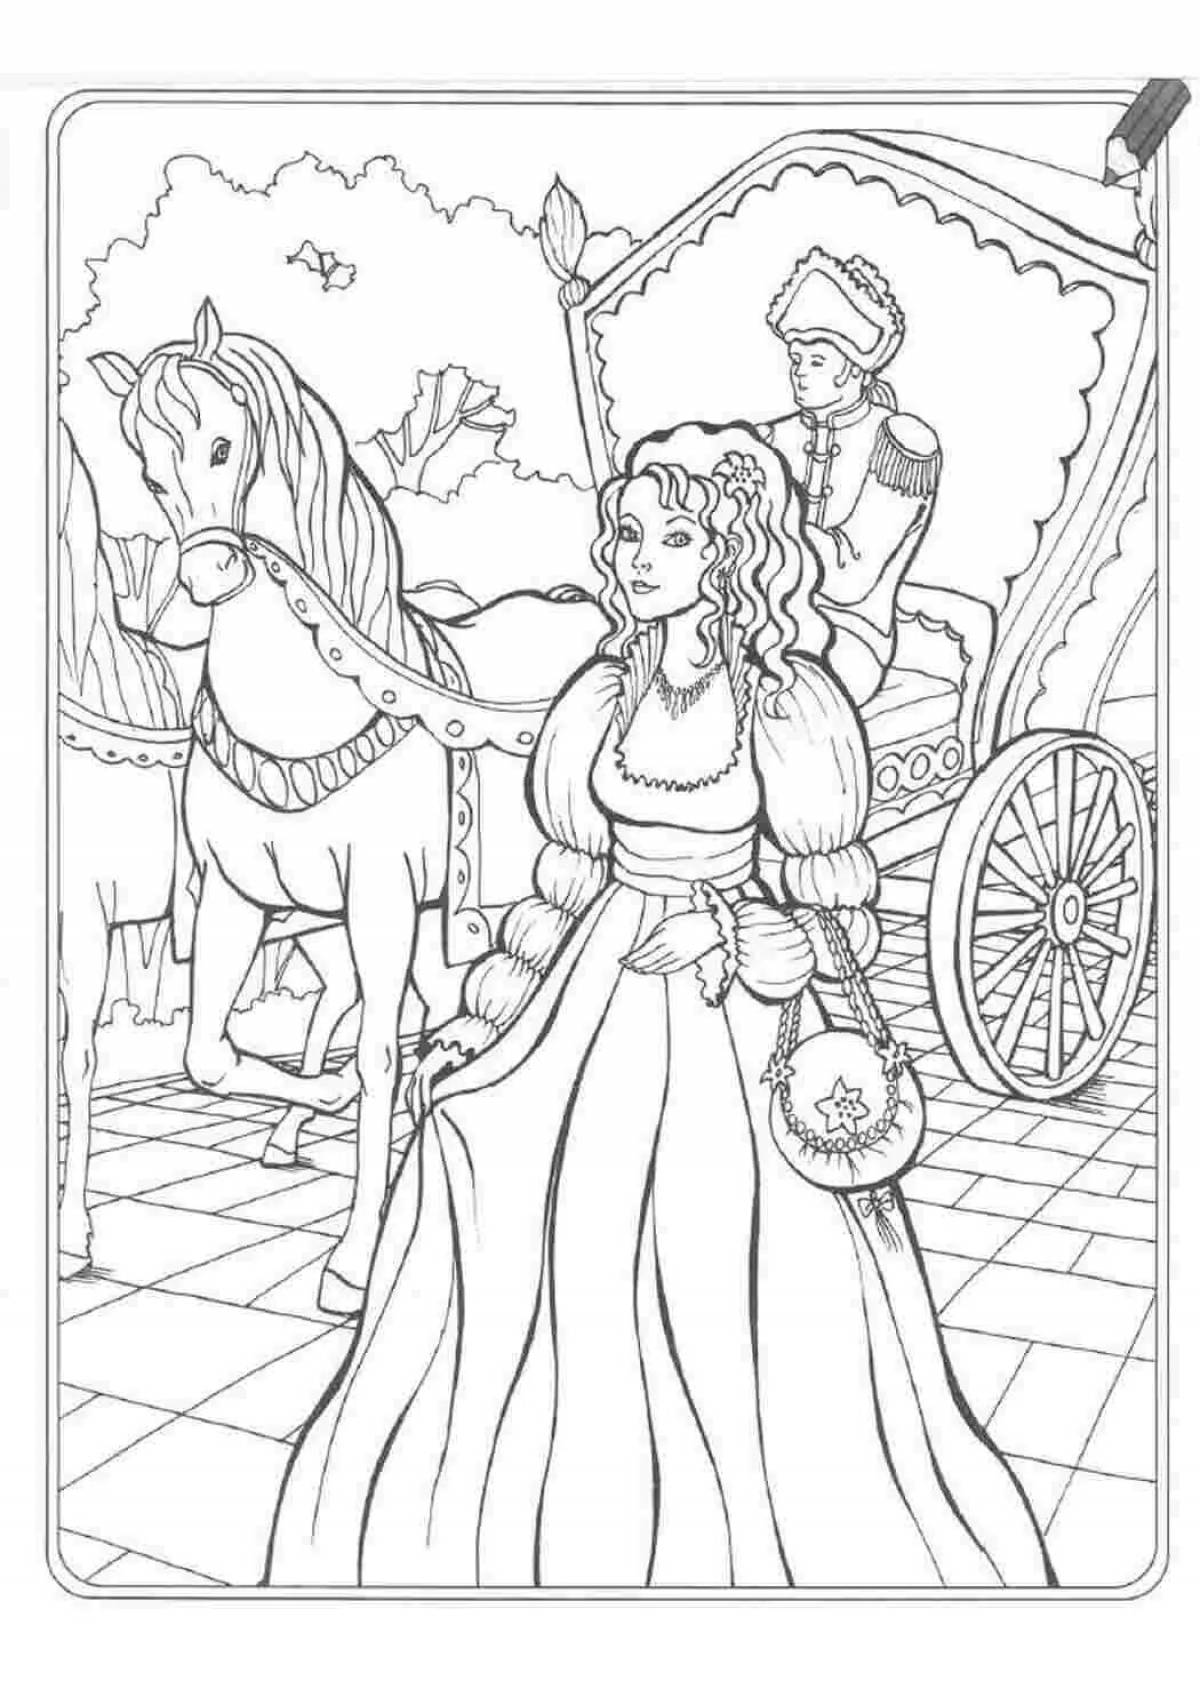 Coloring page luxurious princess in a carriage